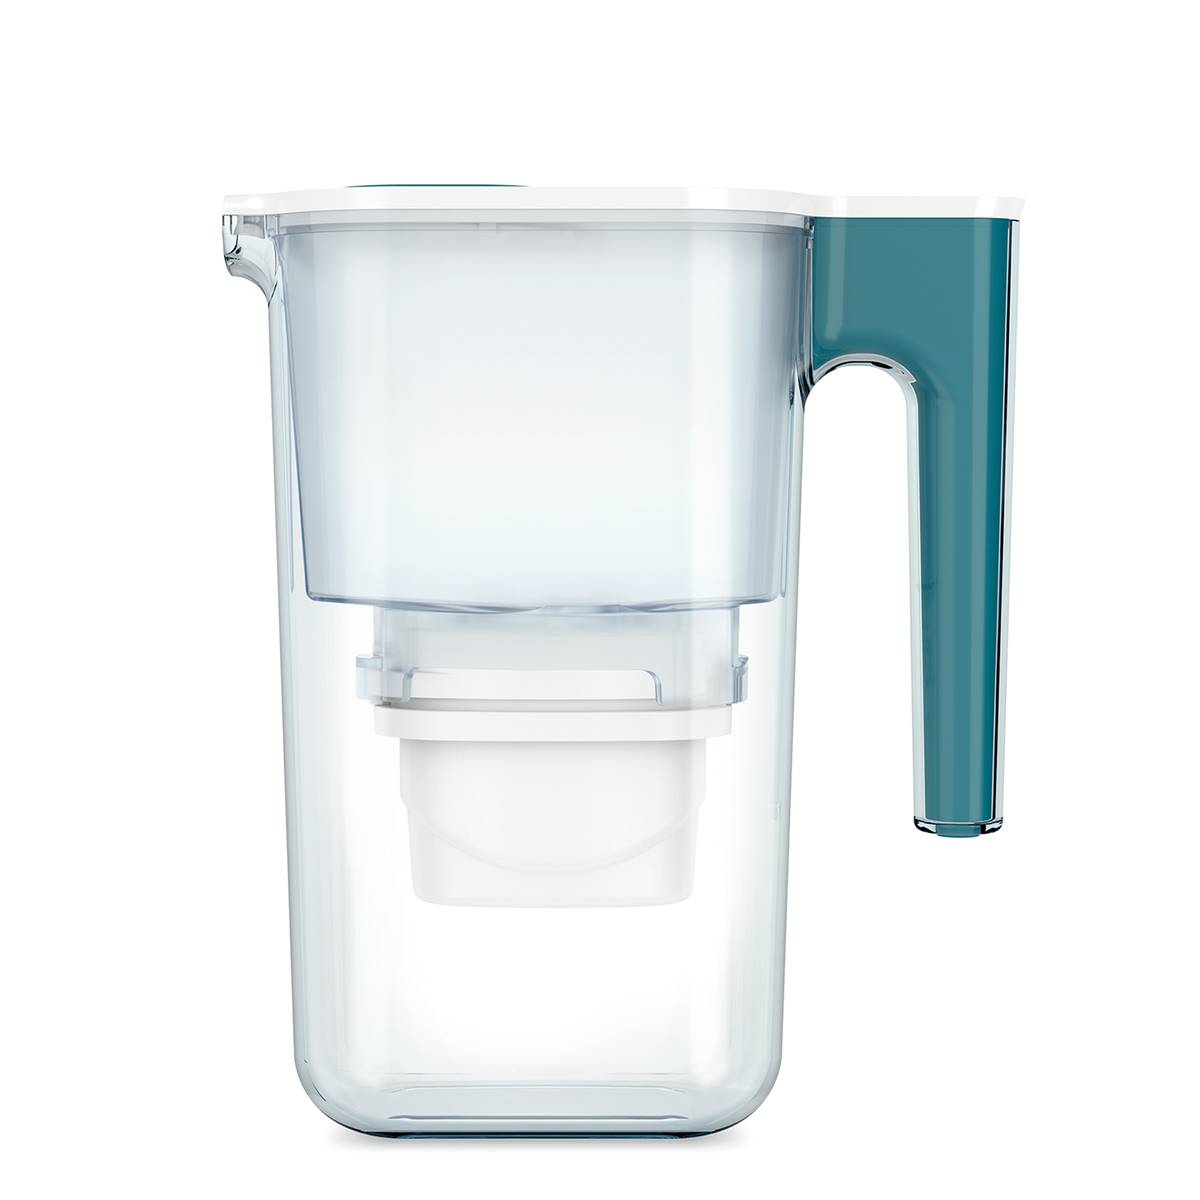 Aqua Optima 6-Cup Water Filter Pitcher W/3 Evolve+ Water Filters